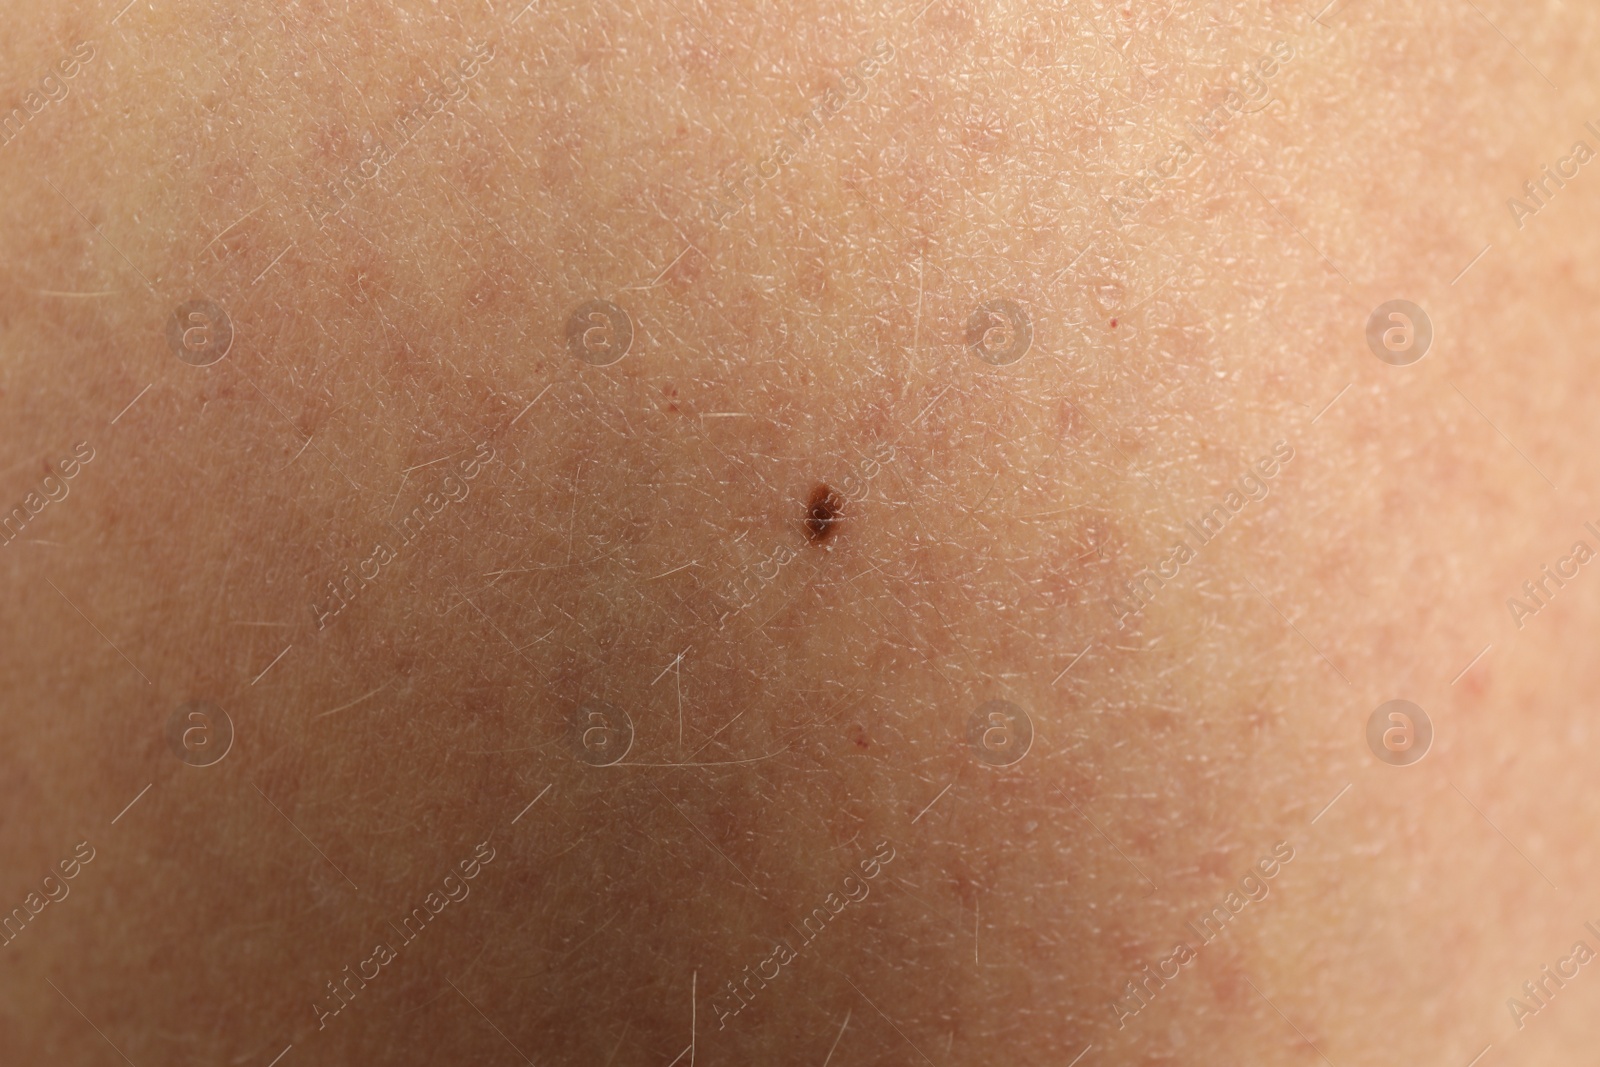 Photo of Closeup view of woman's body with birthmark